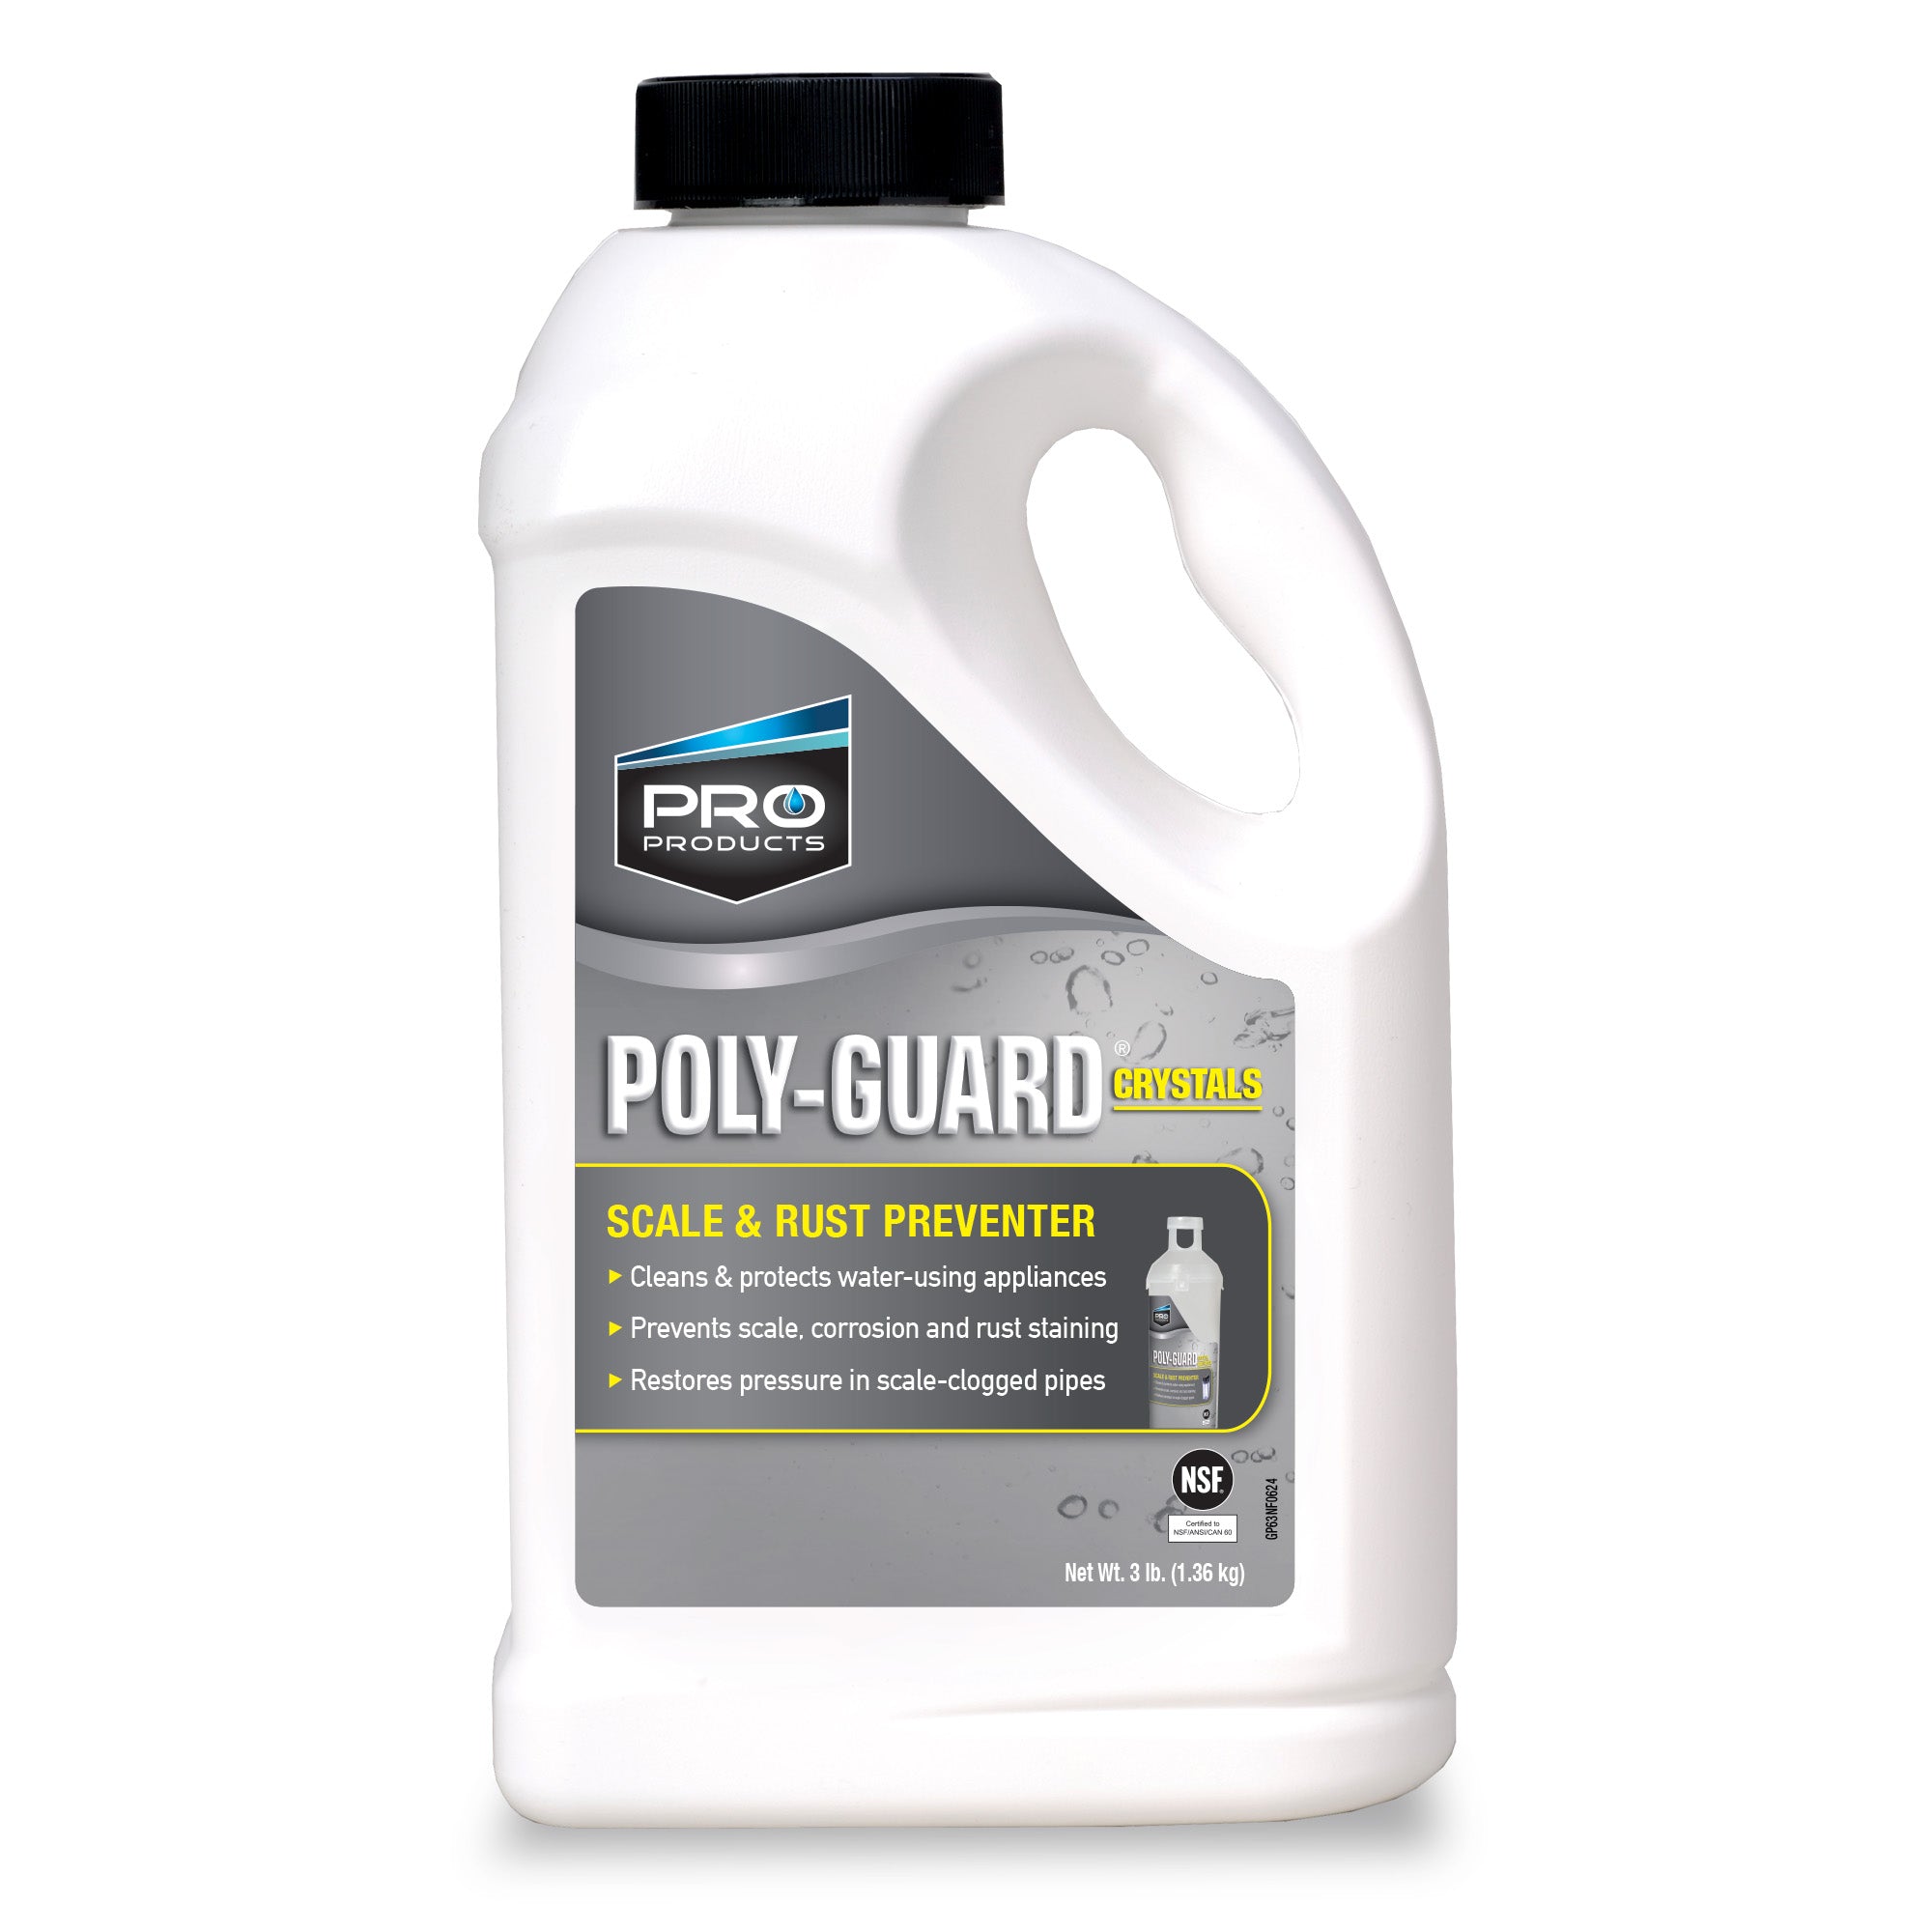 Poly-Guard® Scale & Rust Preventer, Crystals